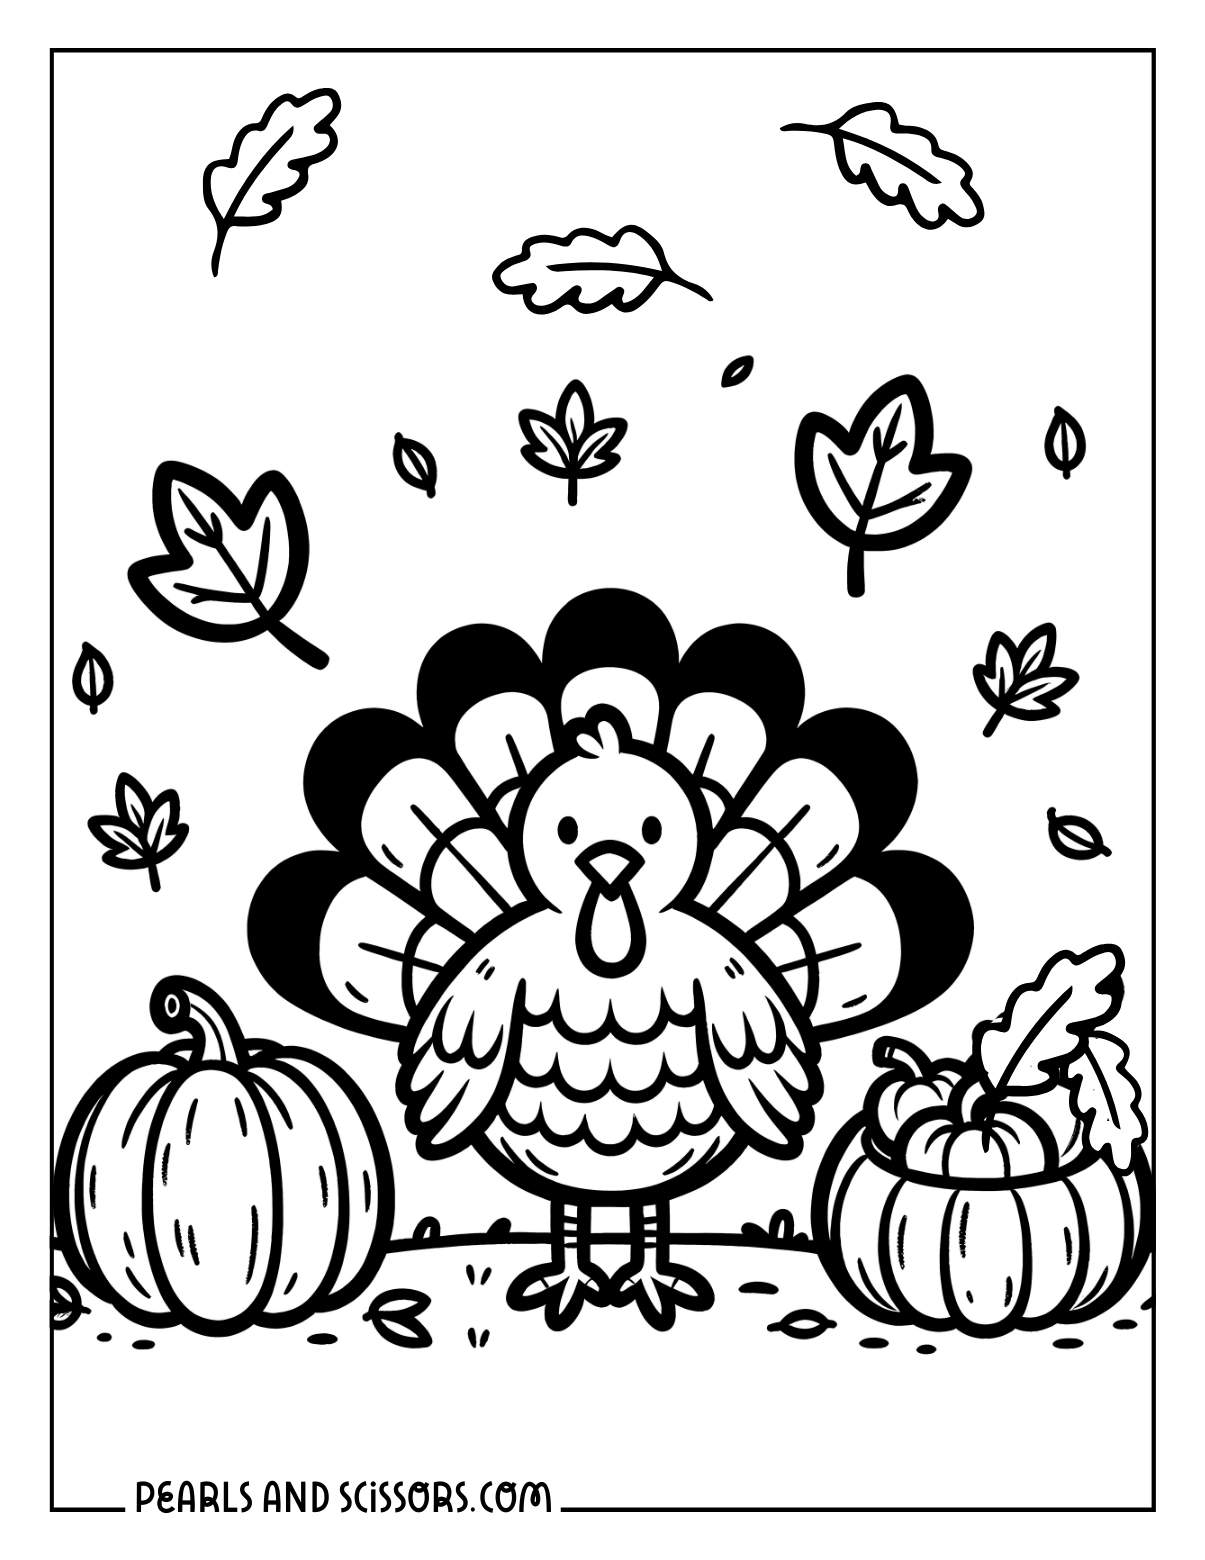 Turkey day thanksgiving coloring page with fall leaves and pumpkins.